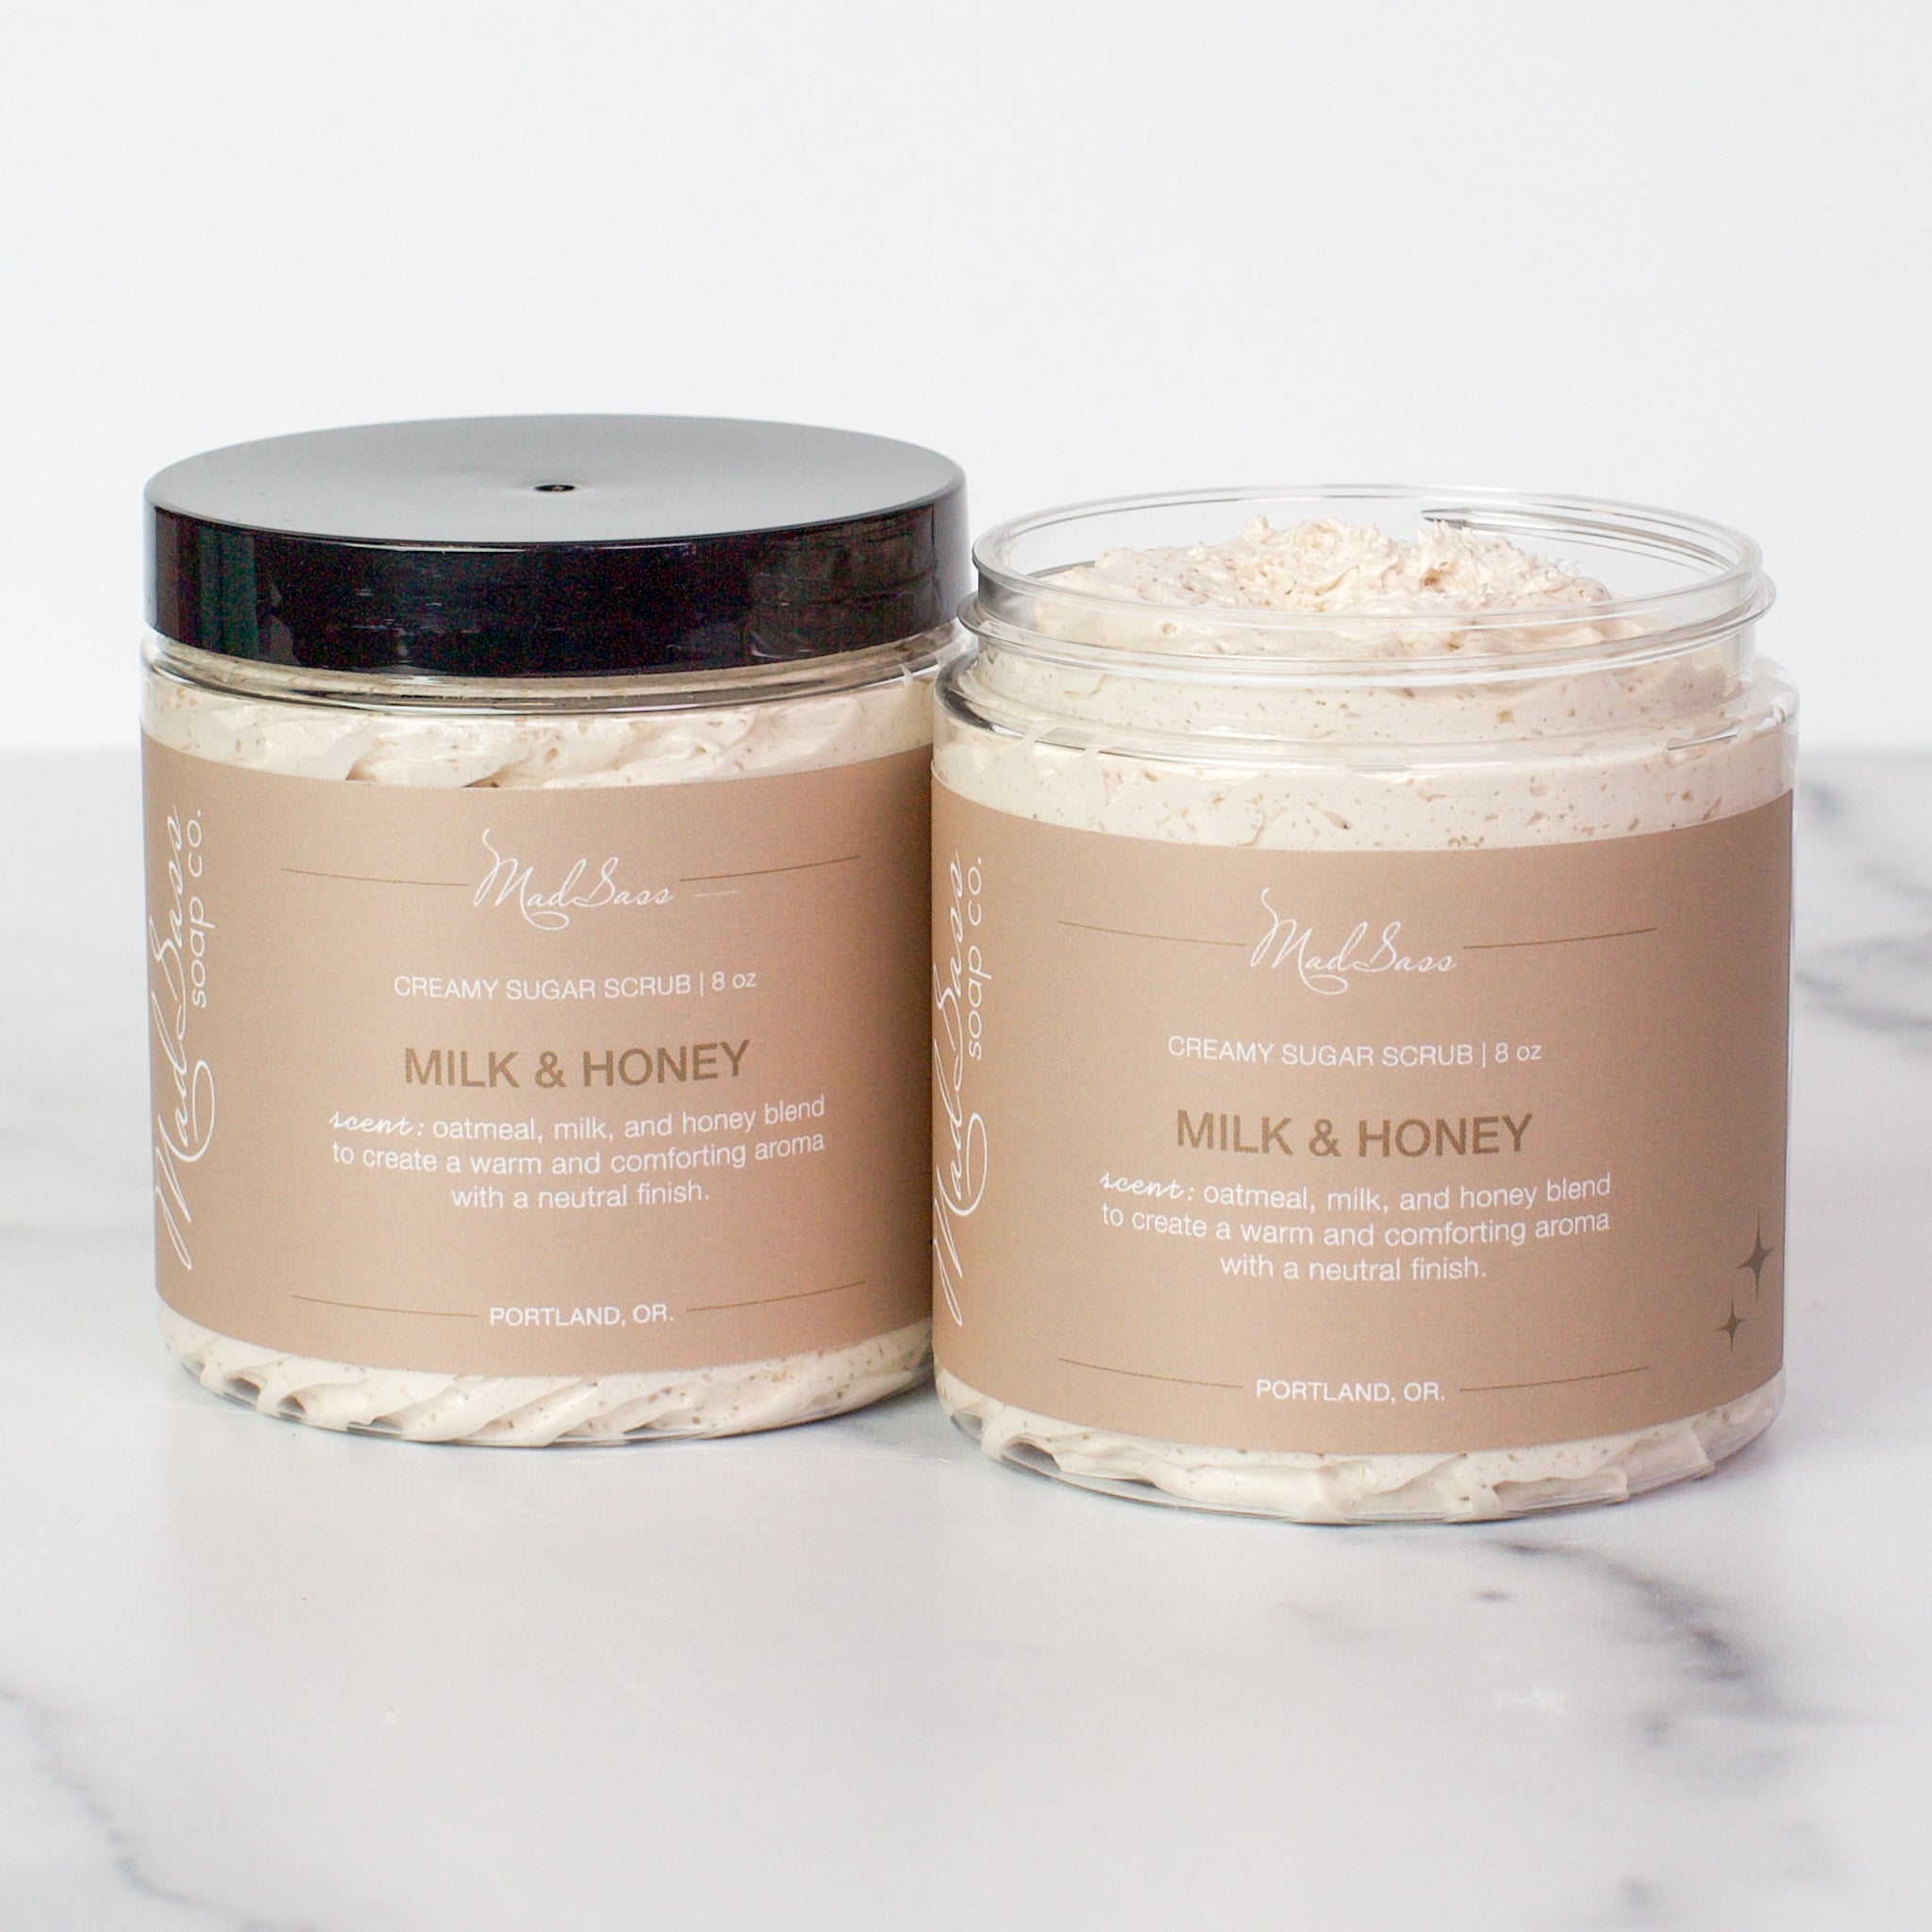 Two containers of Milk & Honey Creamy Sugar Scrubs on a white background. Milk & Honey is a light tan scrub in a clear tub with a black lid.